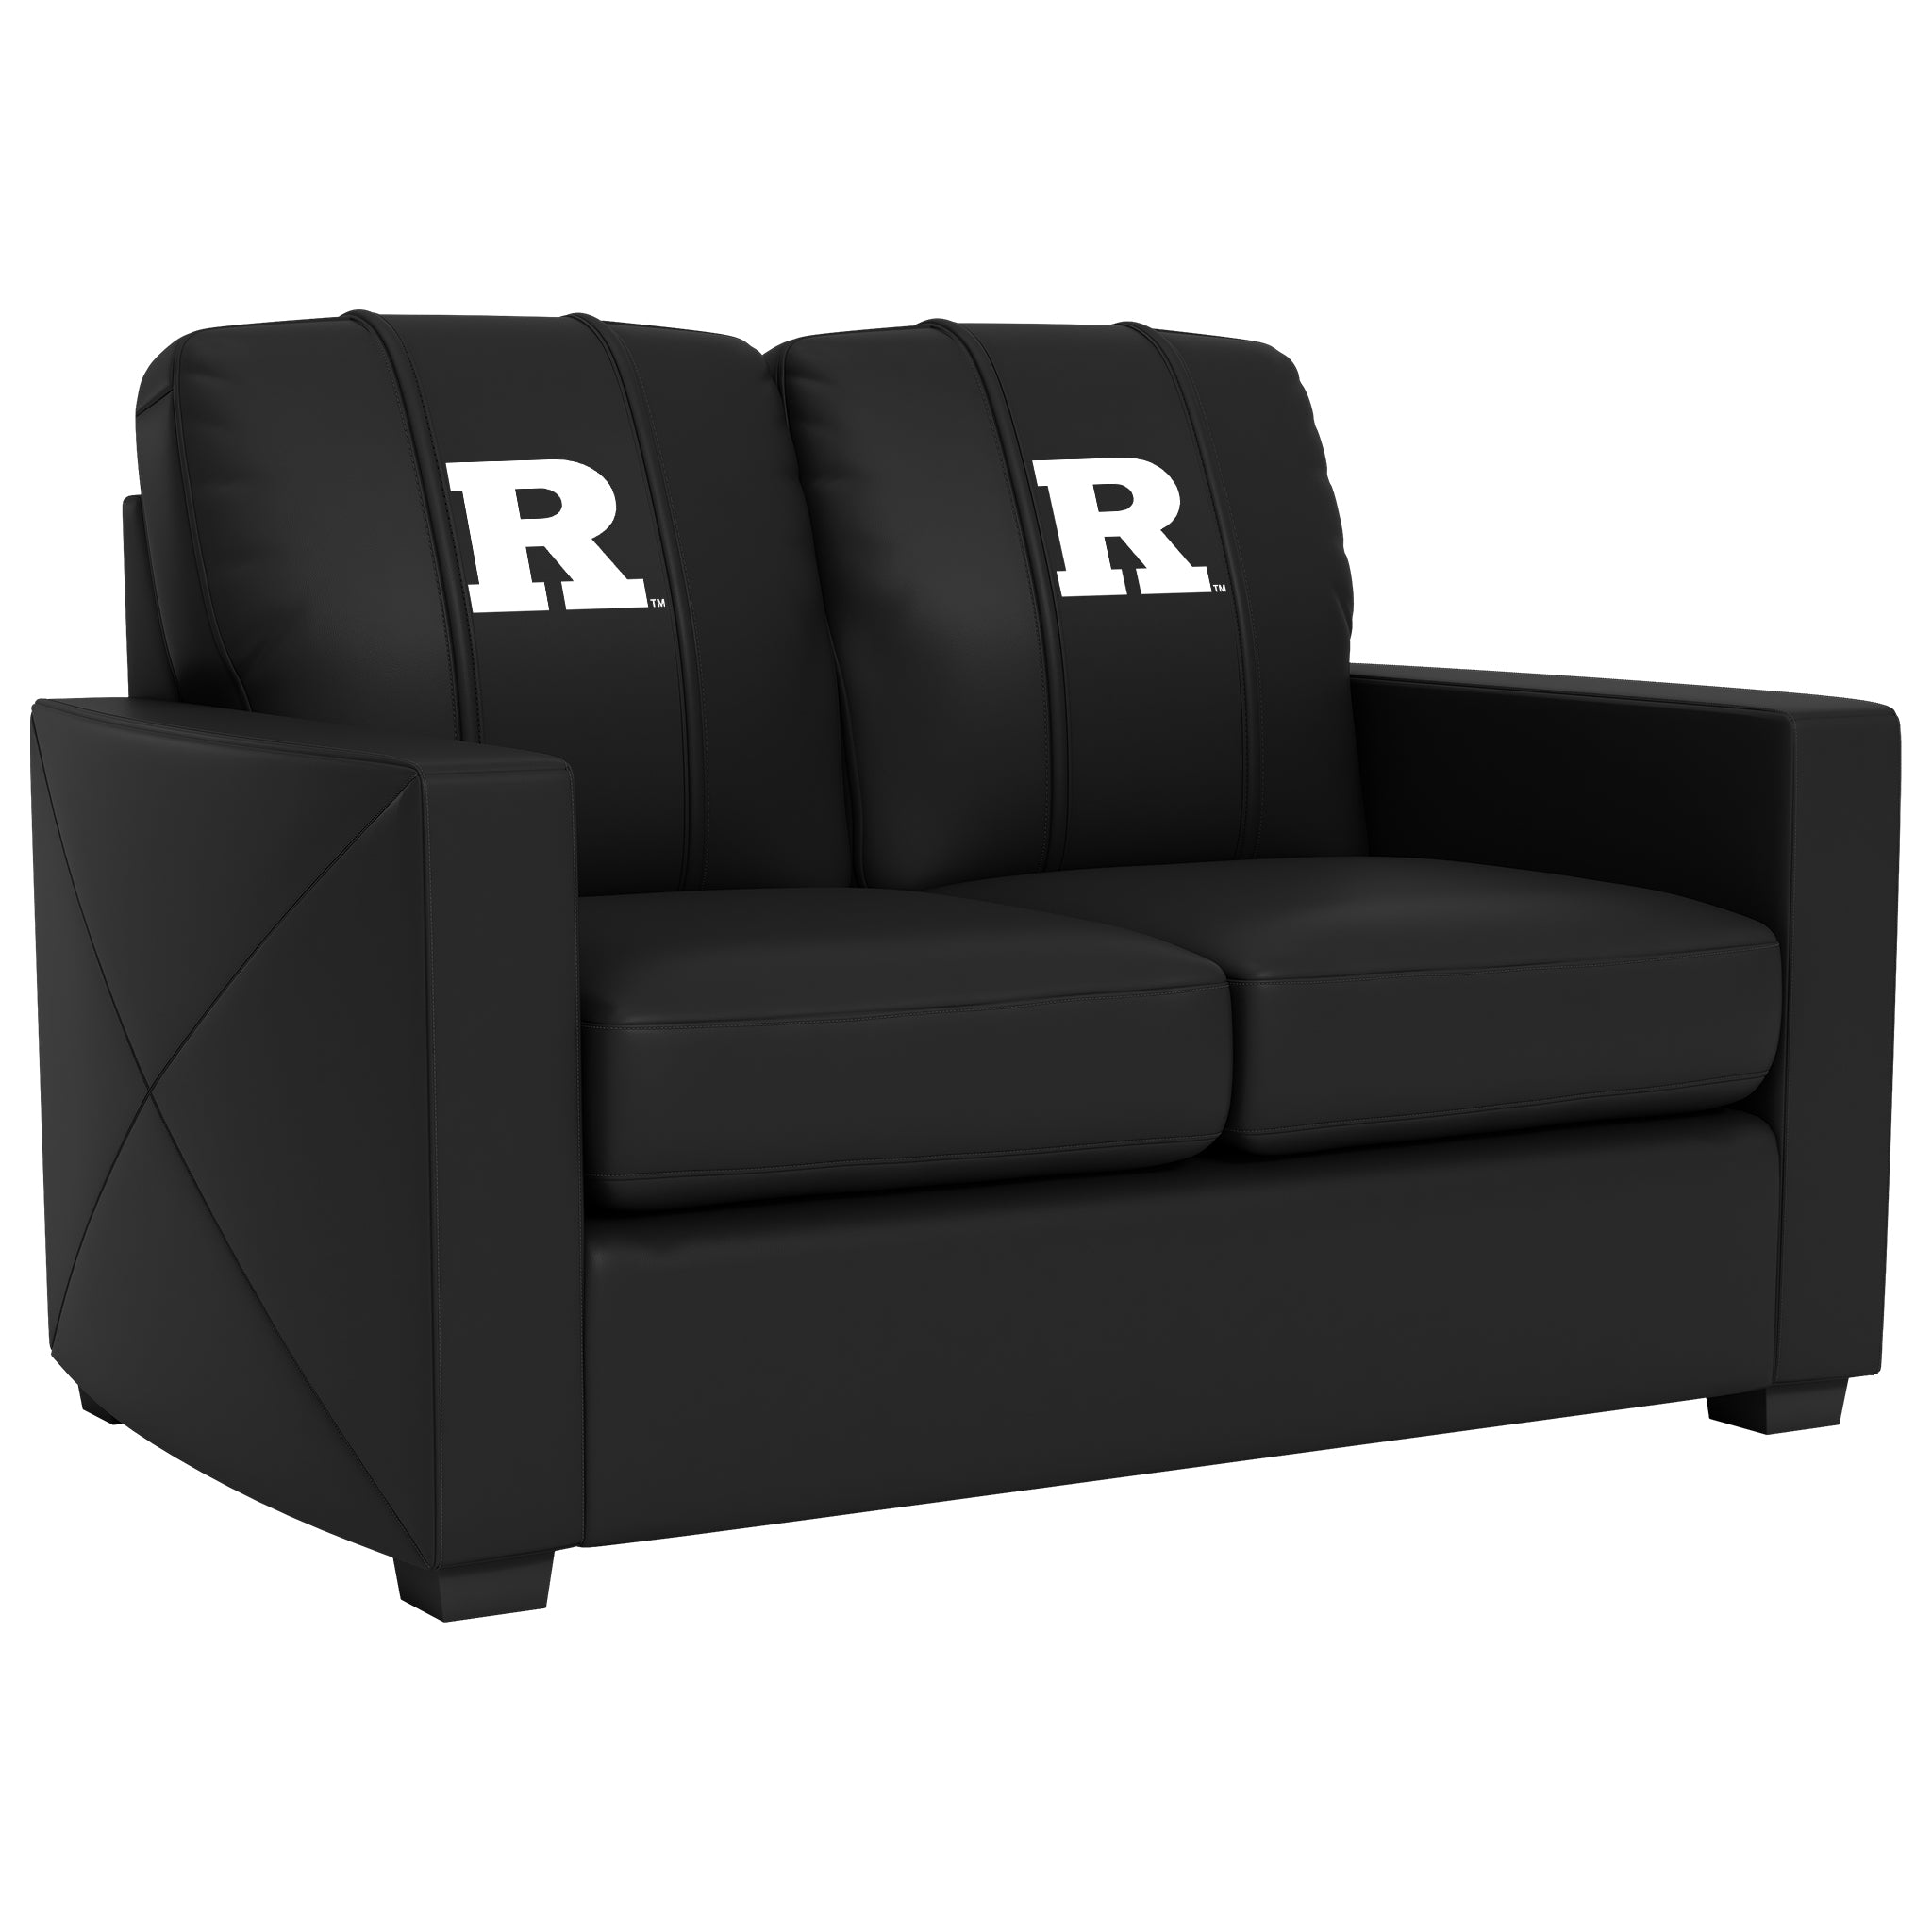 Rutgers Scarlet Knights  Silver Loveseat with Rutgers Scarlet Knights White Logo